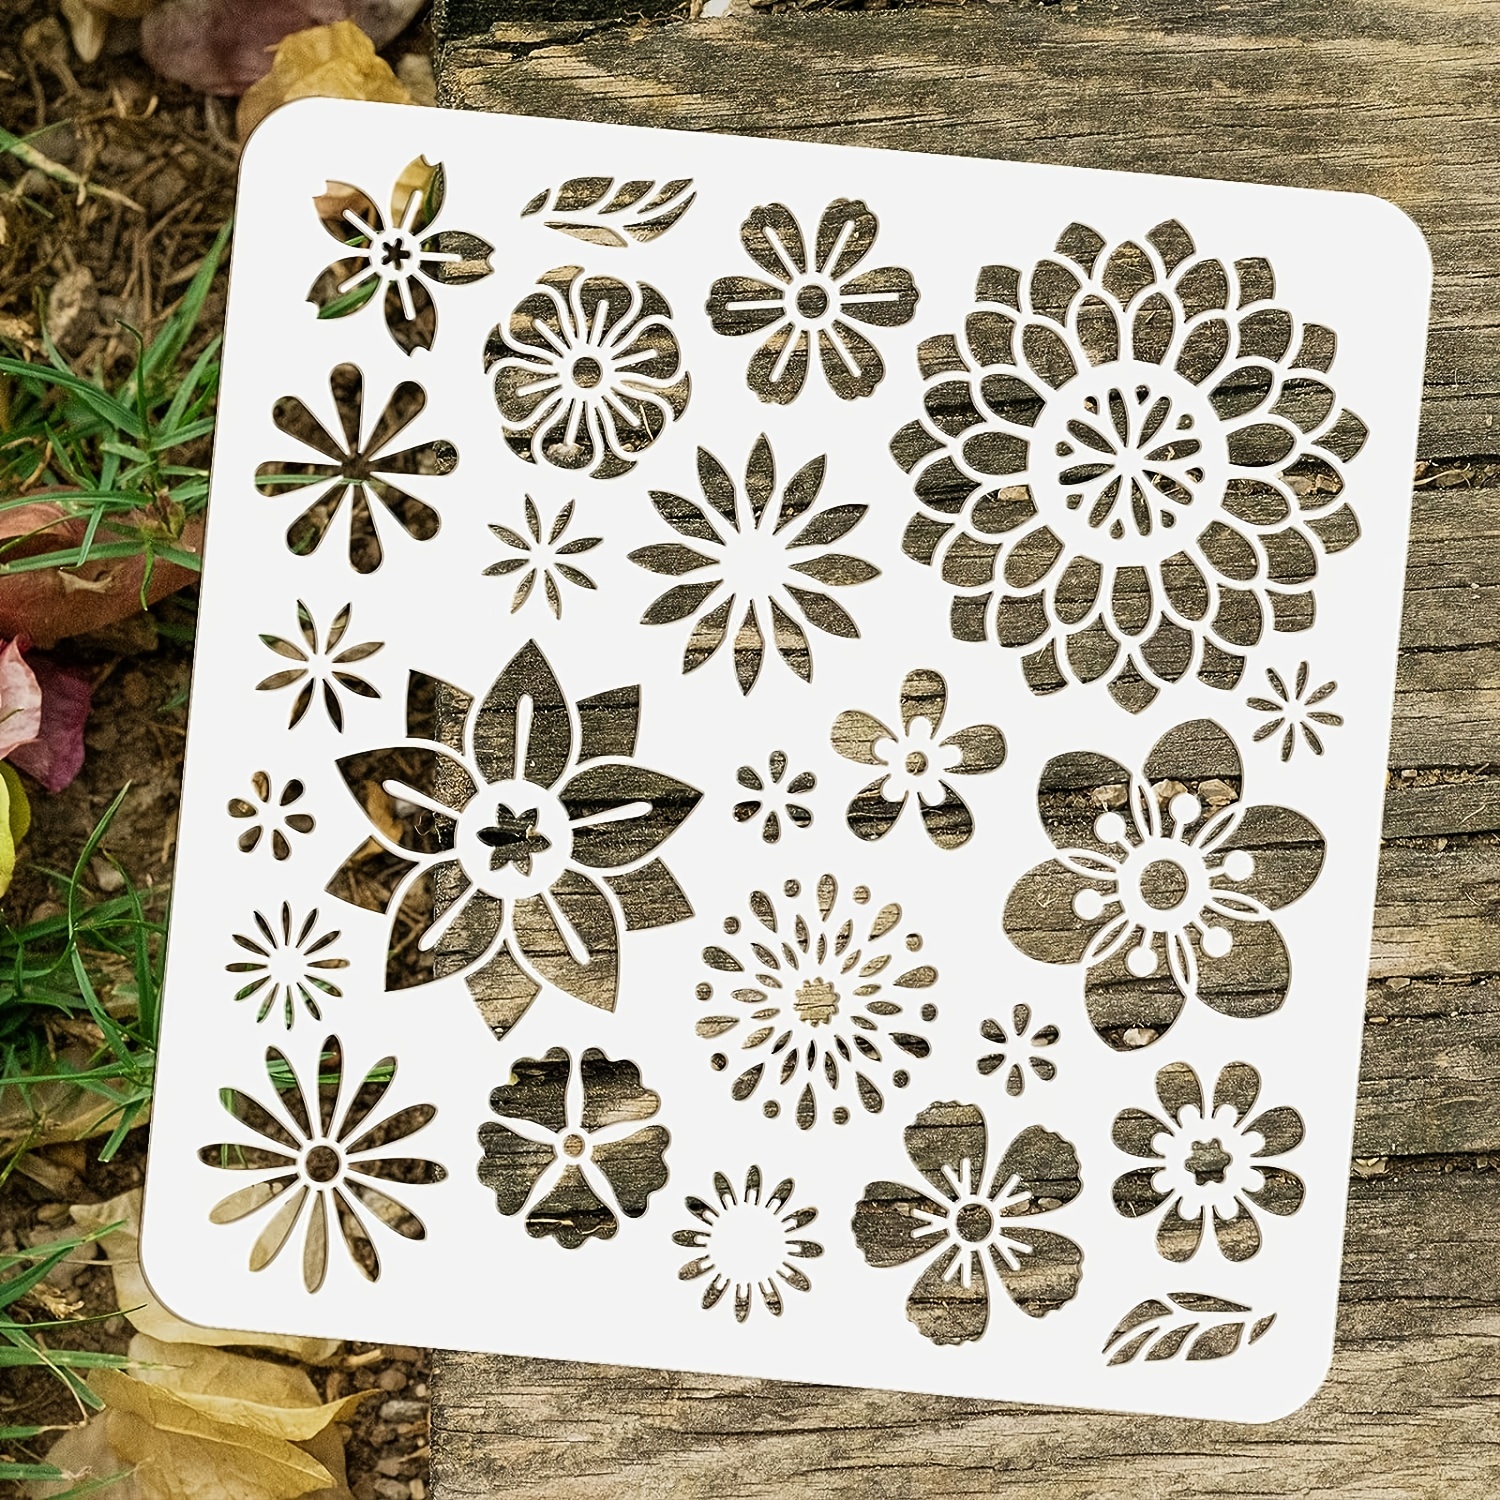 12x12inch Plant Fantasy Plastic Painting Stencils Templates Floral Pattern  Reusable Stencil Flowers Template for DIY Art Craft Wall Canvas Furniture 